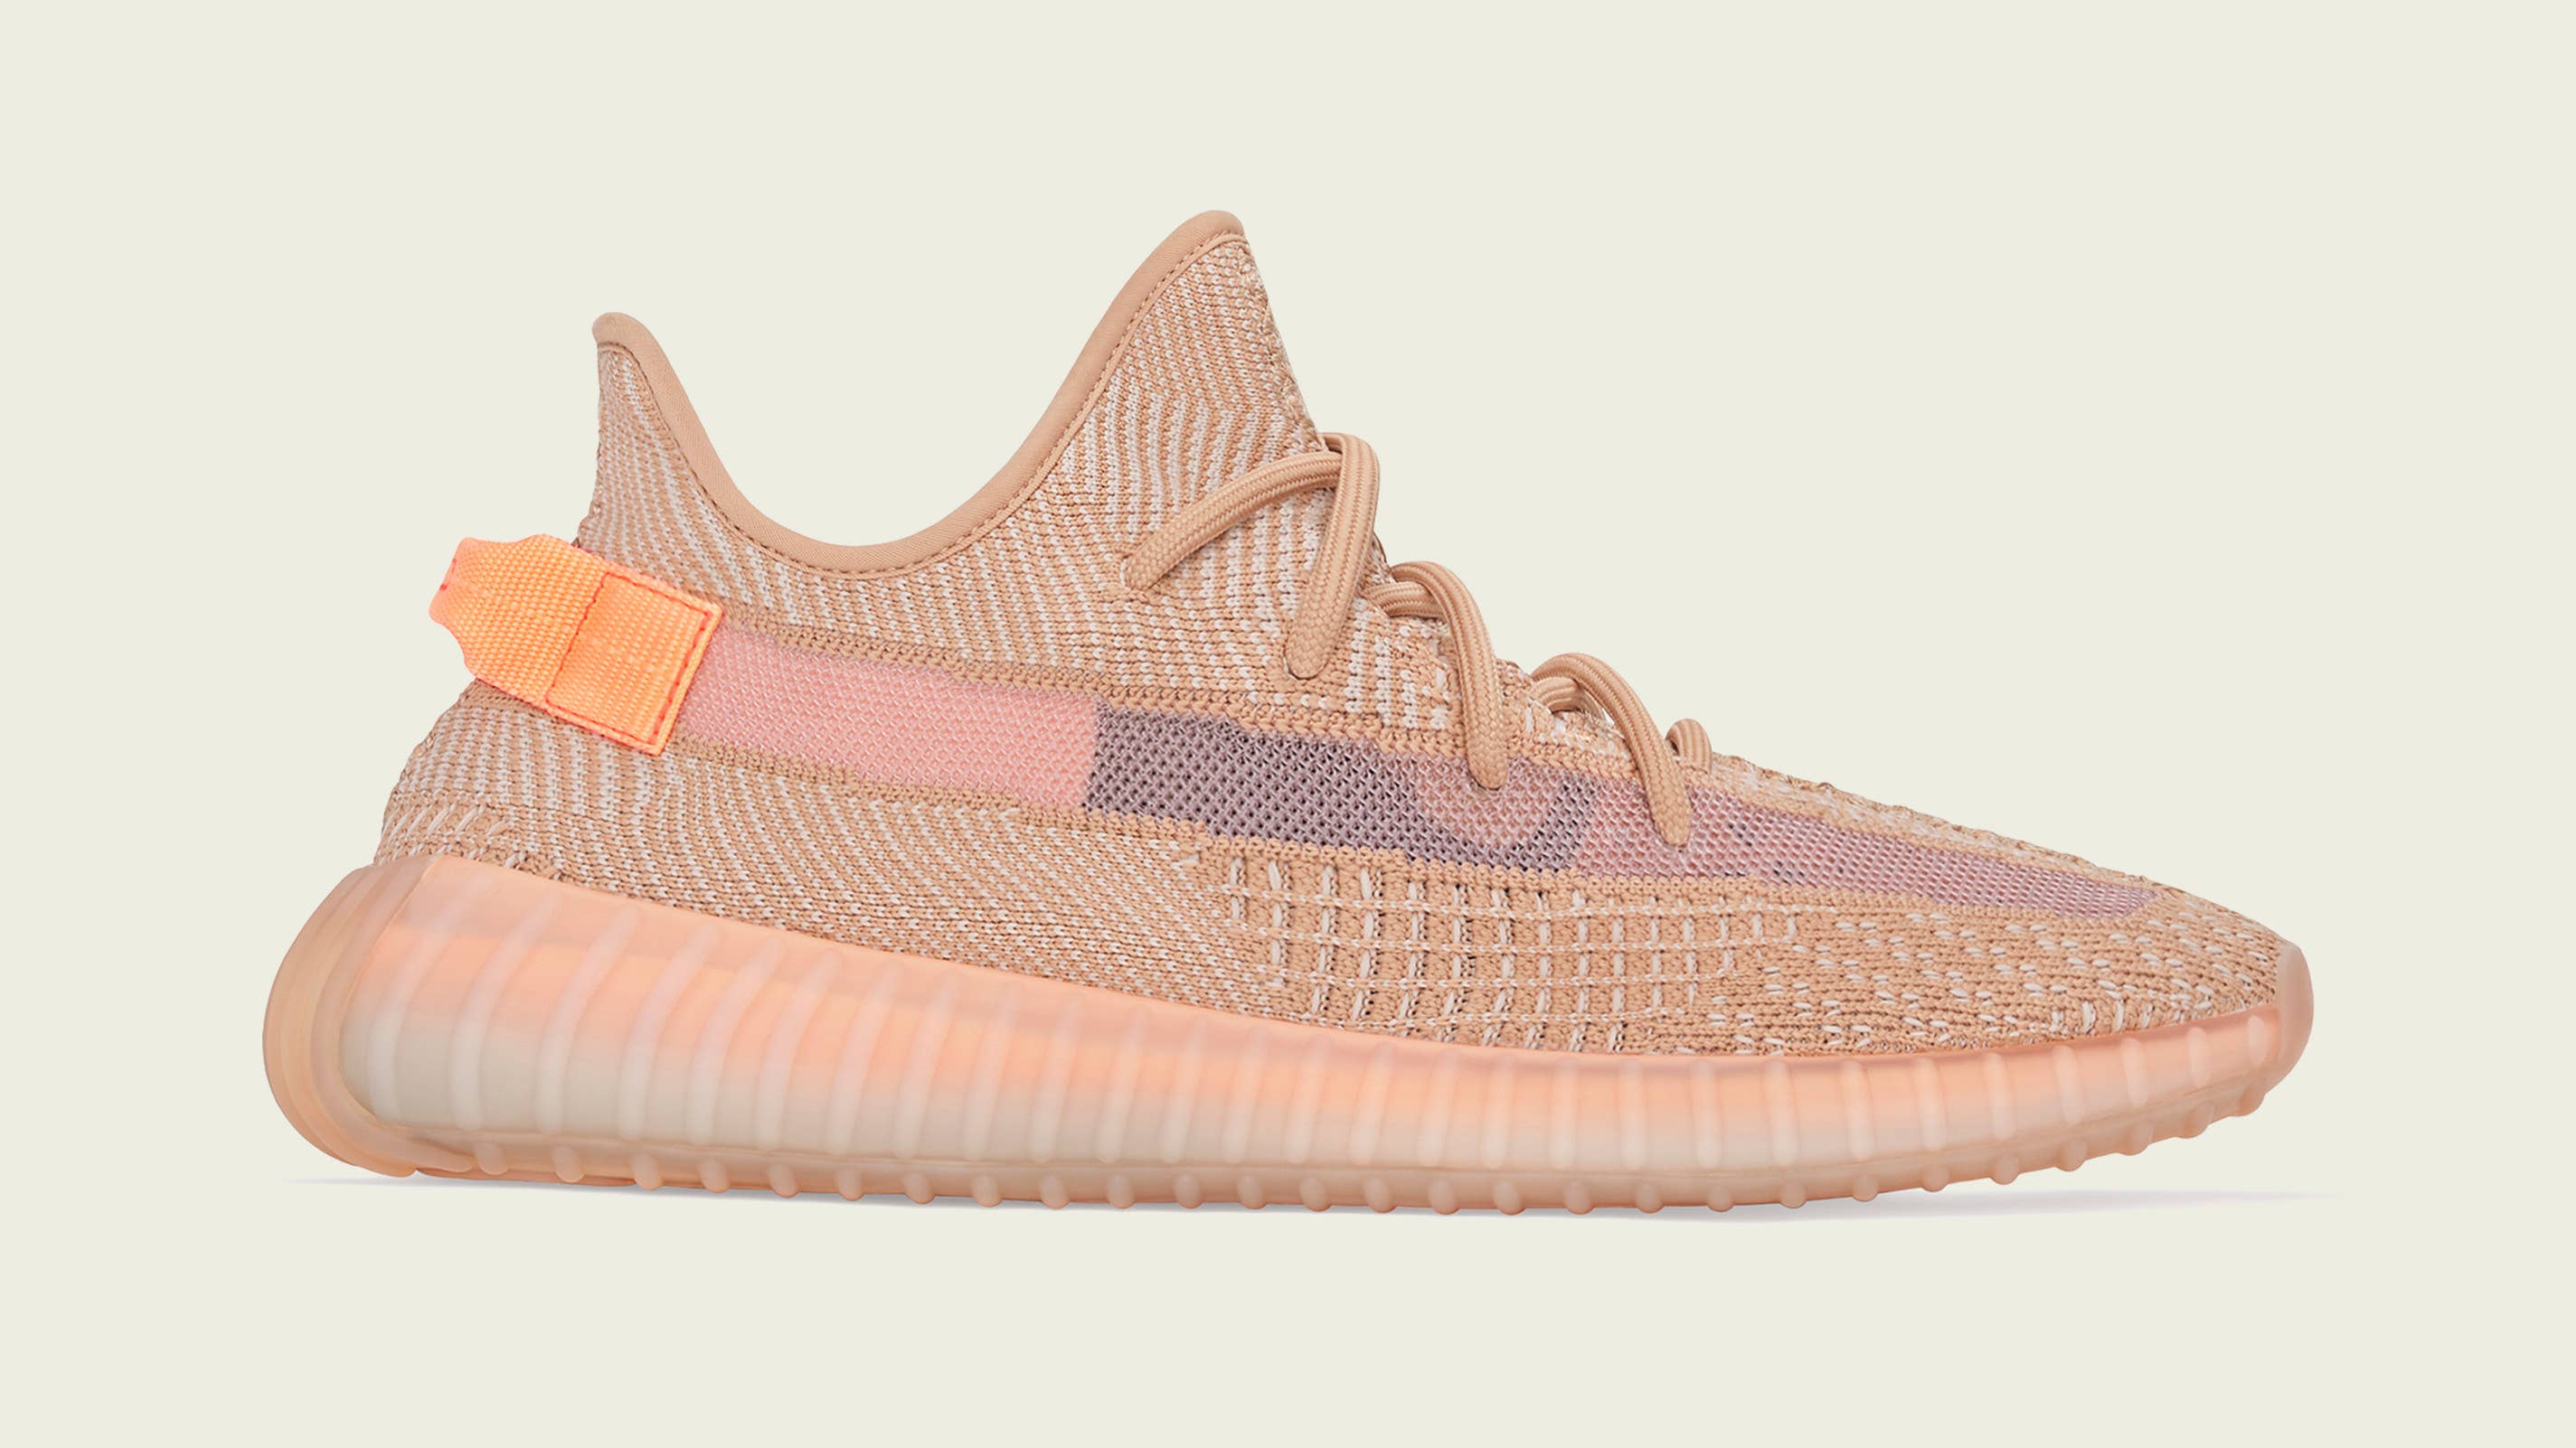 Adidas Yeezy Boost 350 V2 'Clay' (Lateral)